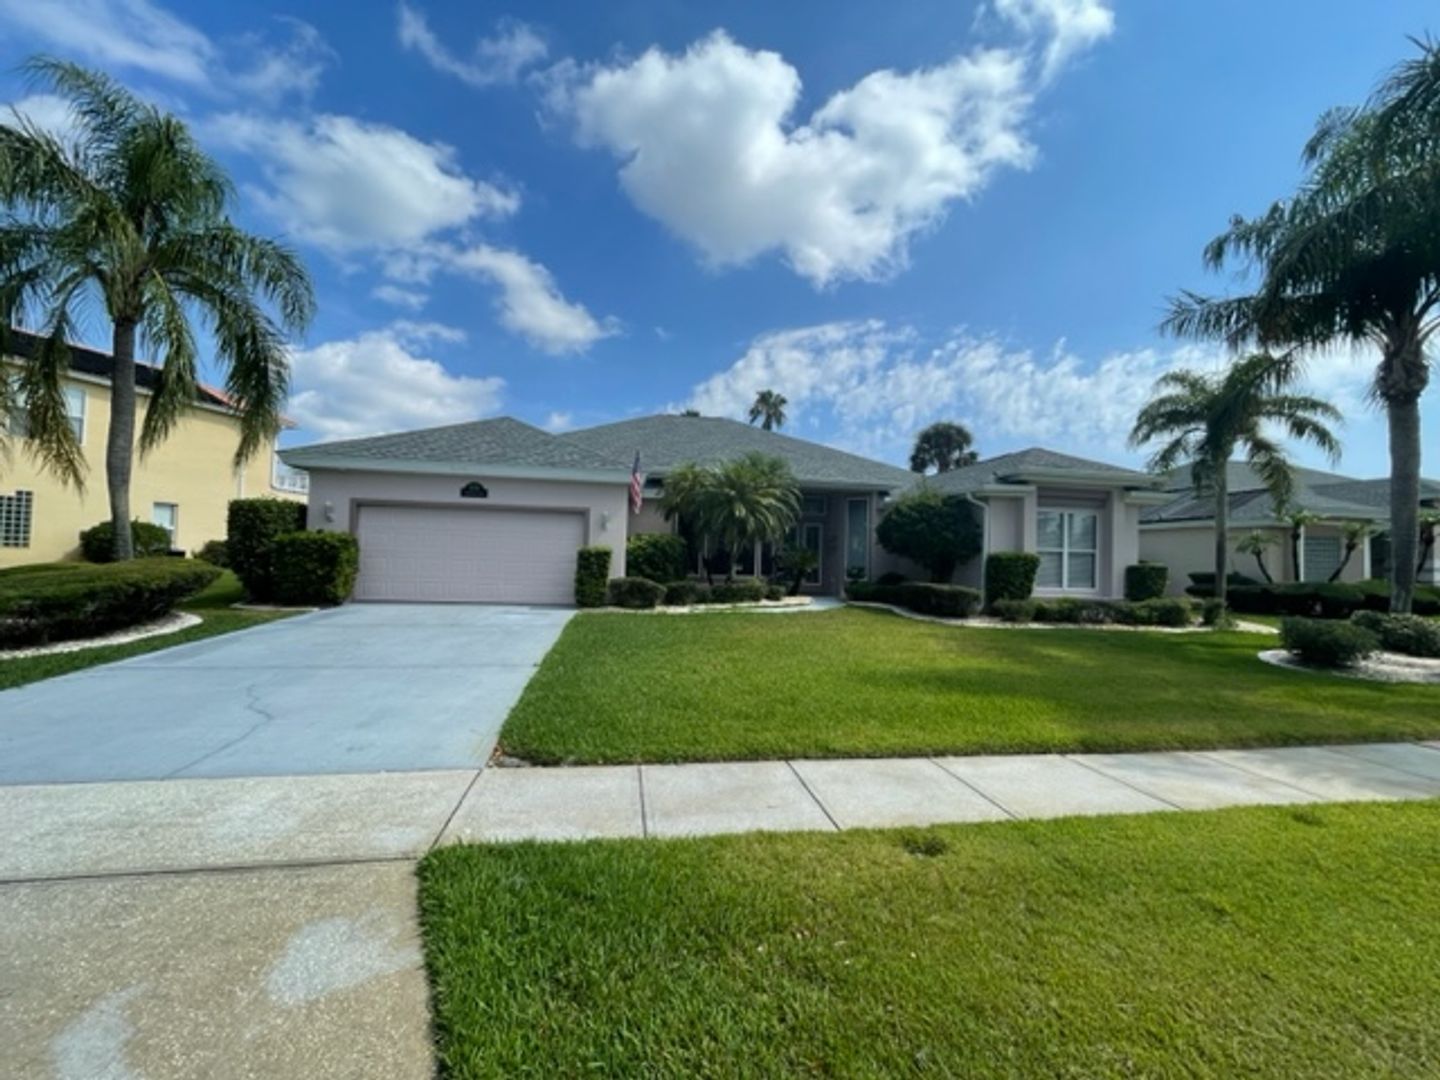 Beautiful 3/3 home with huge screened in pool - 10 minutes from the beach in Port Orange